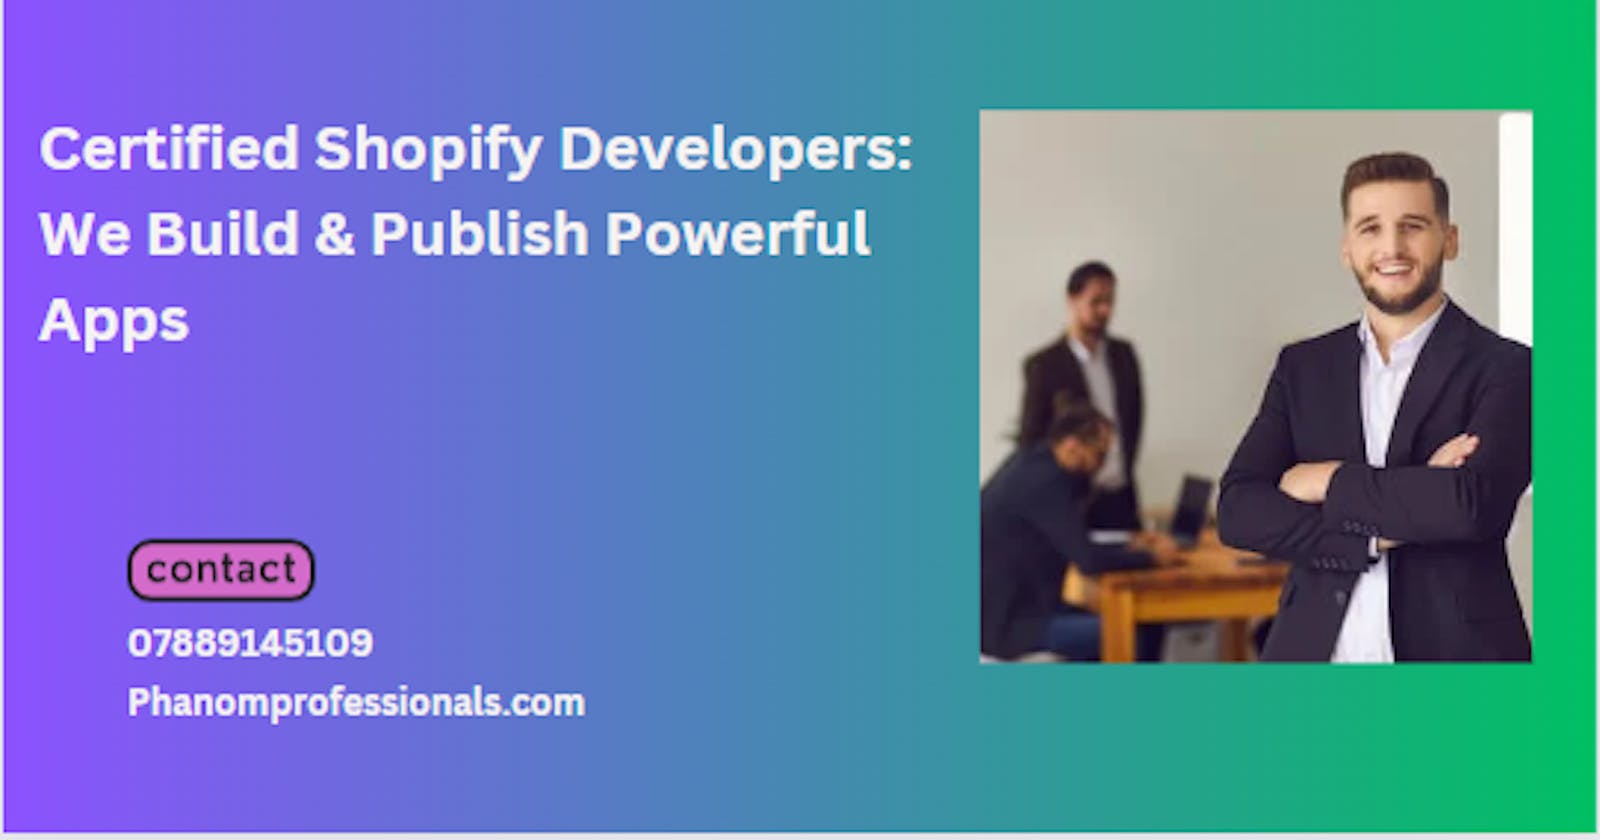 Certified Shopify Developers: We Build & Publish Powerful Apps